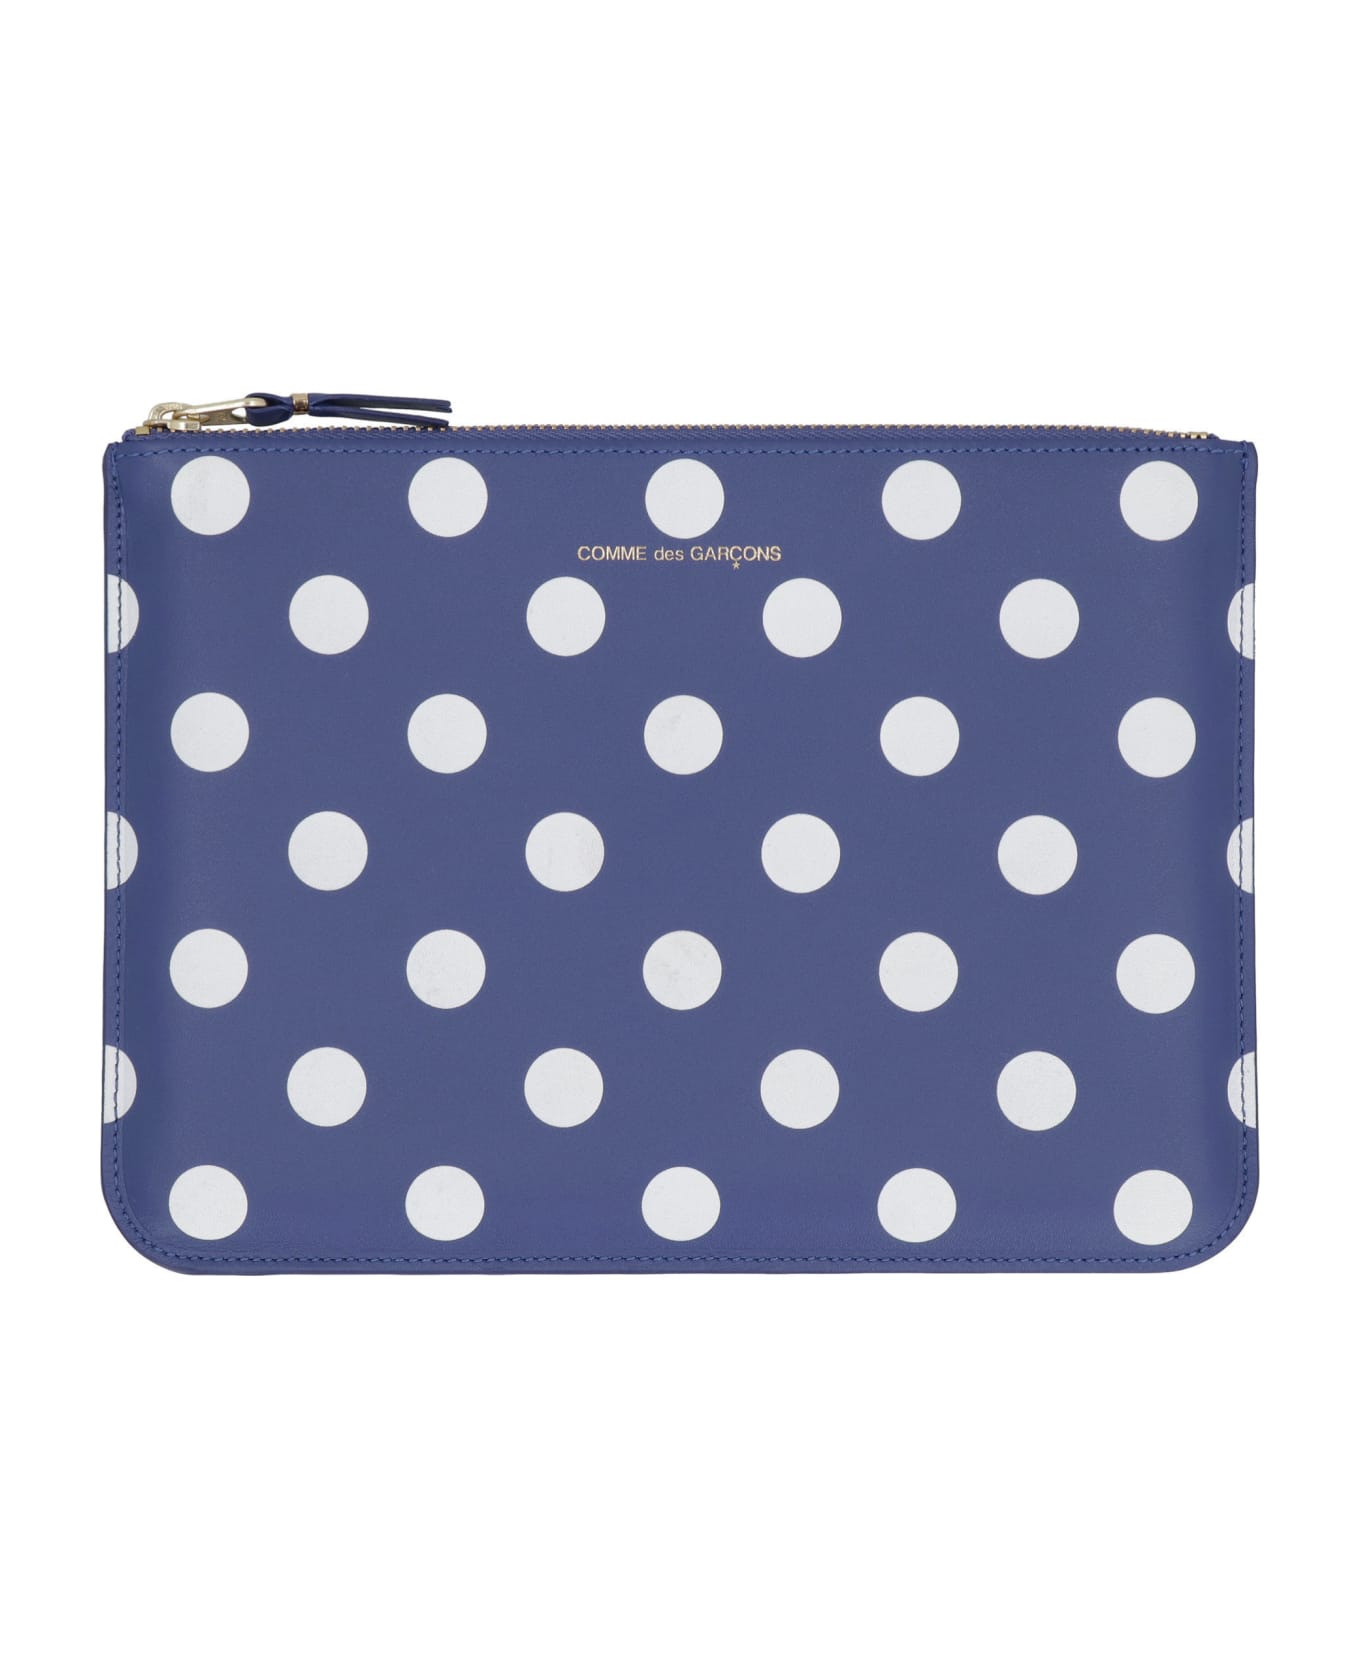 Comme des Garçons Wallet Printed Leather Flat Pouch - blue クラッチバッグ